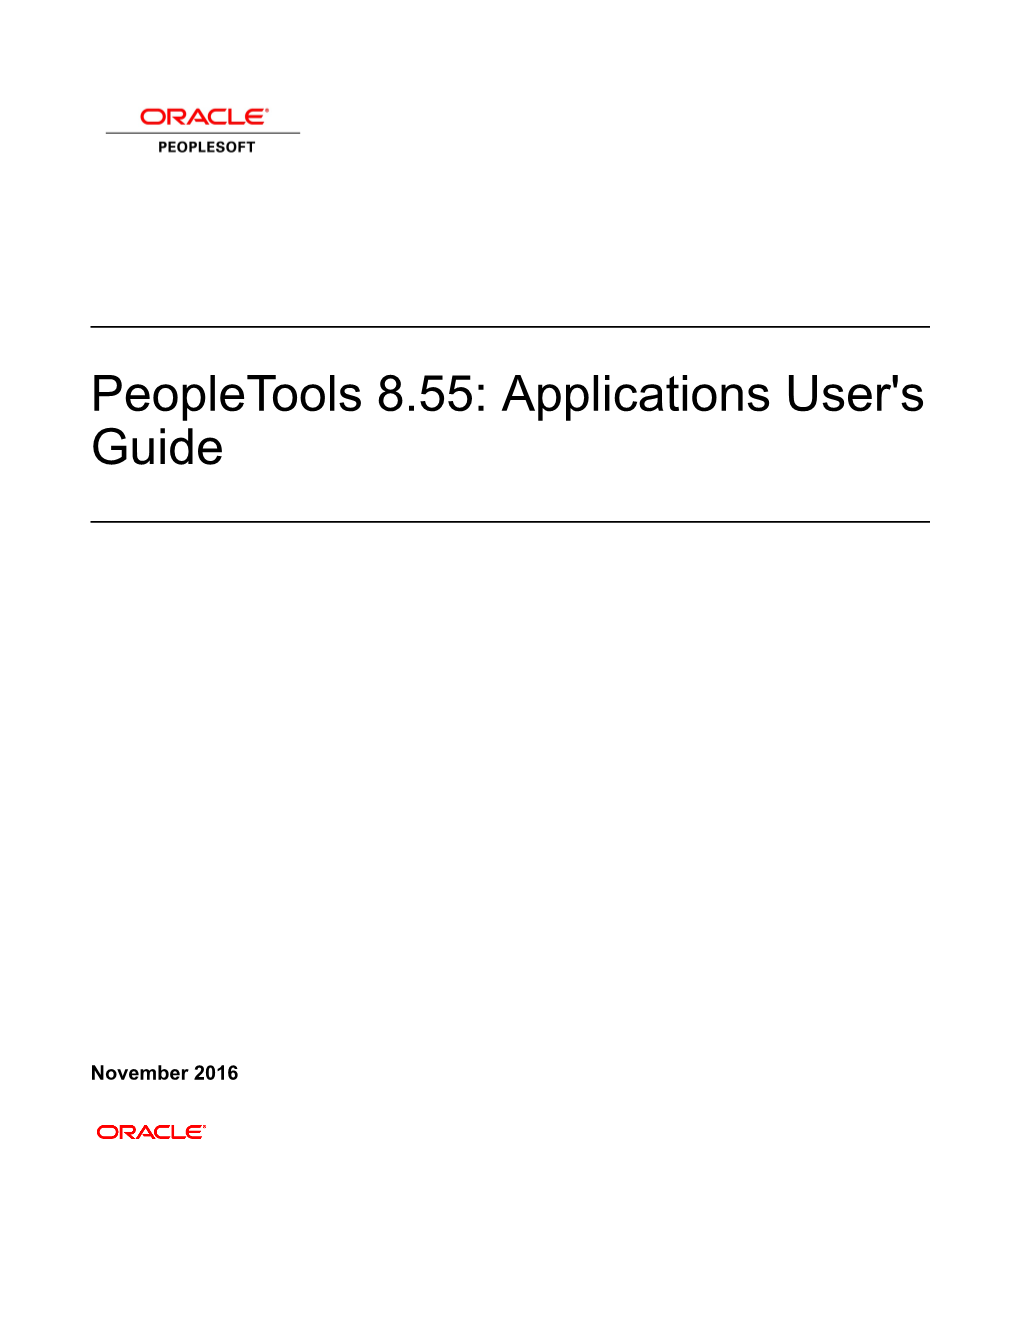 Peopletools 8.55: Applications User's Guide